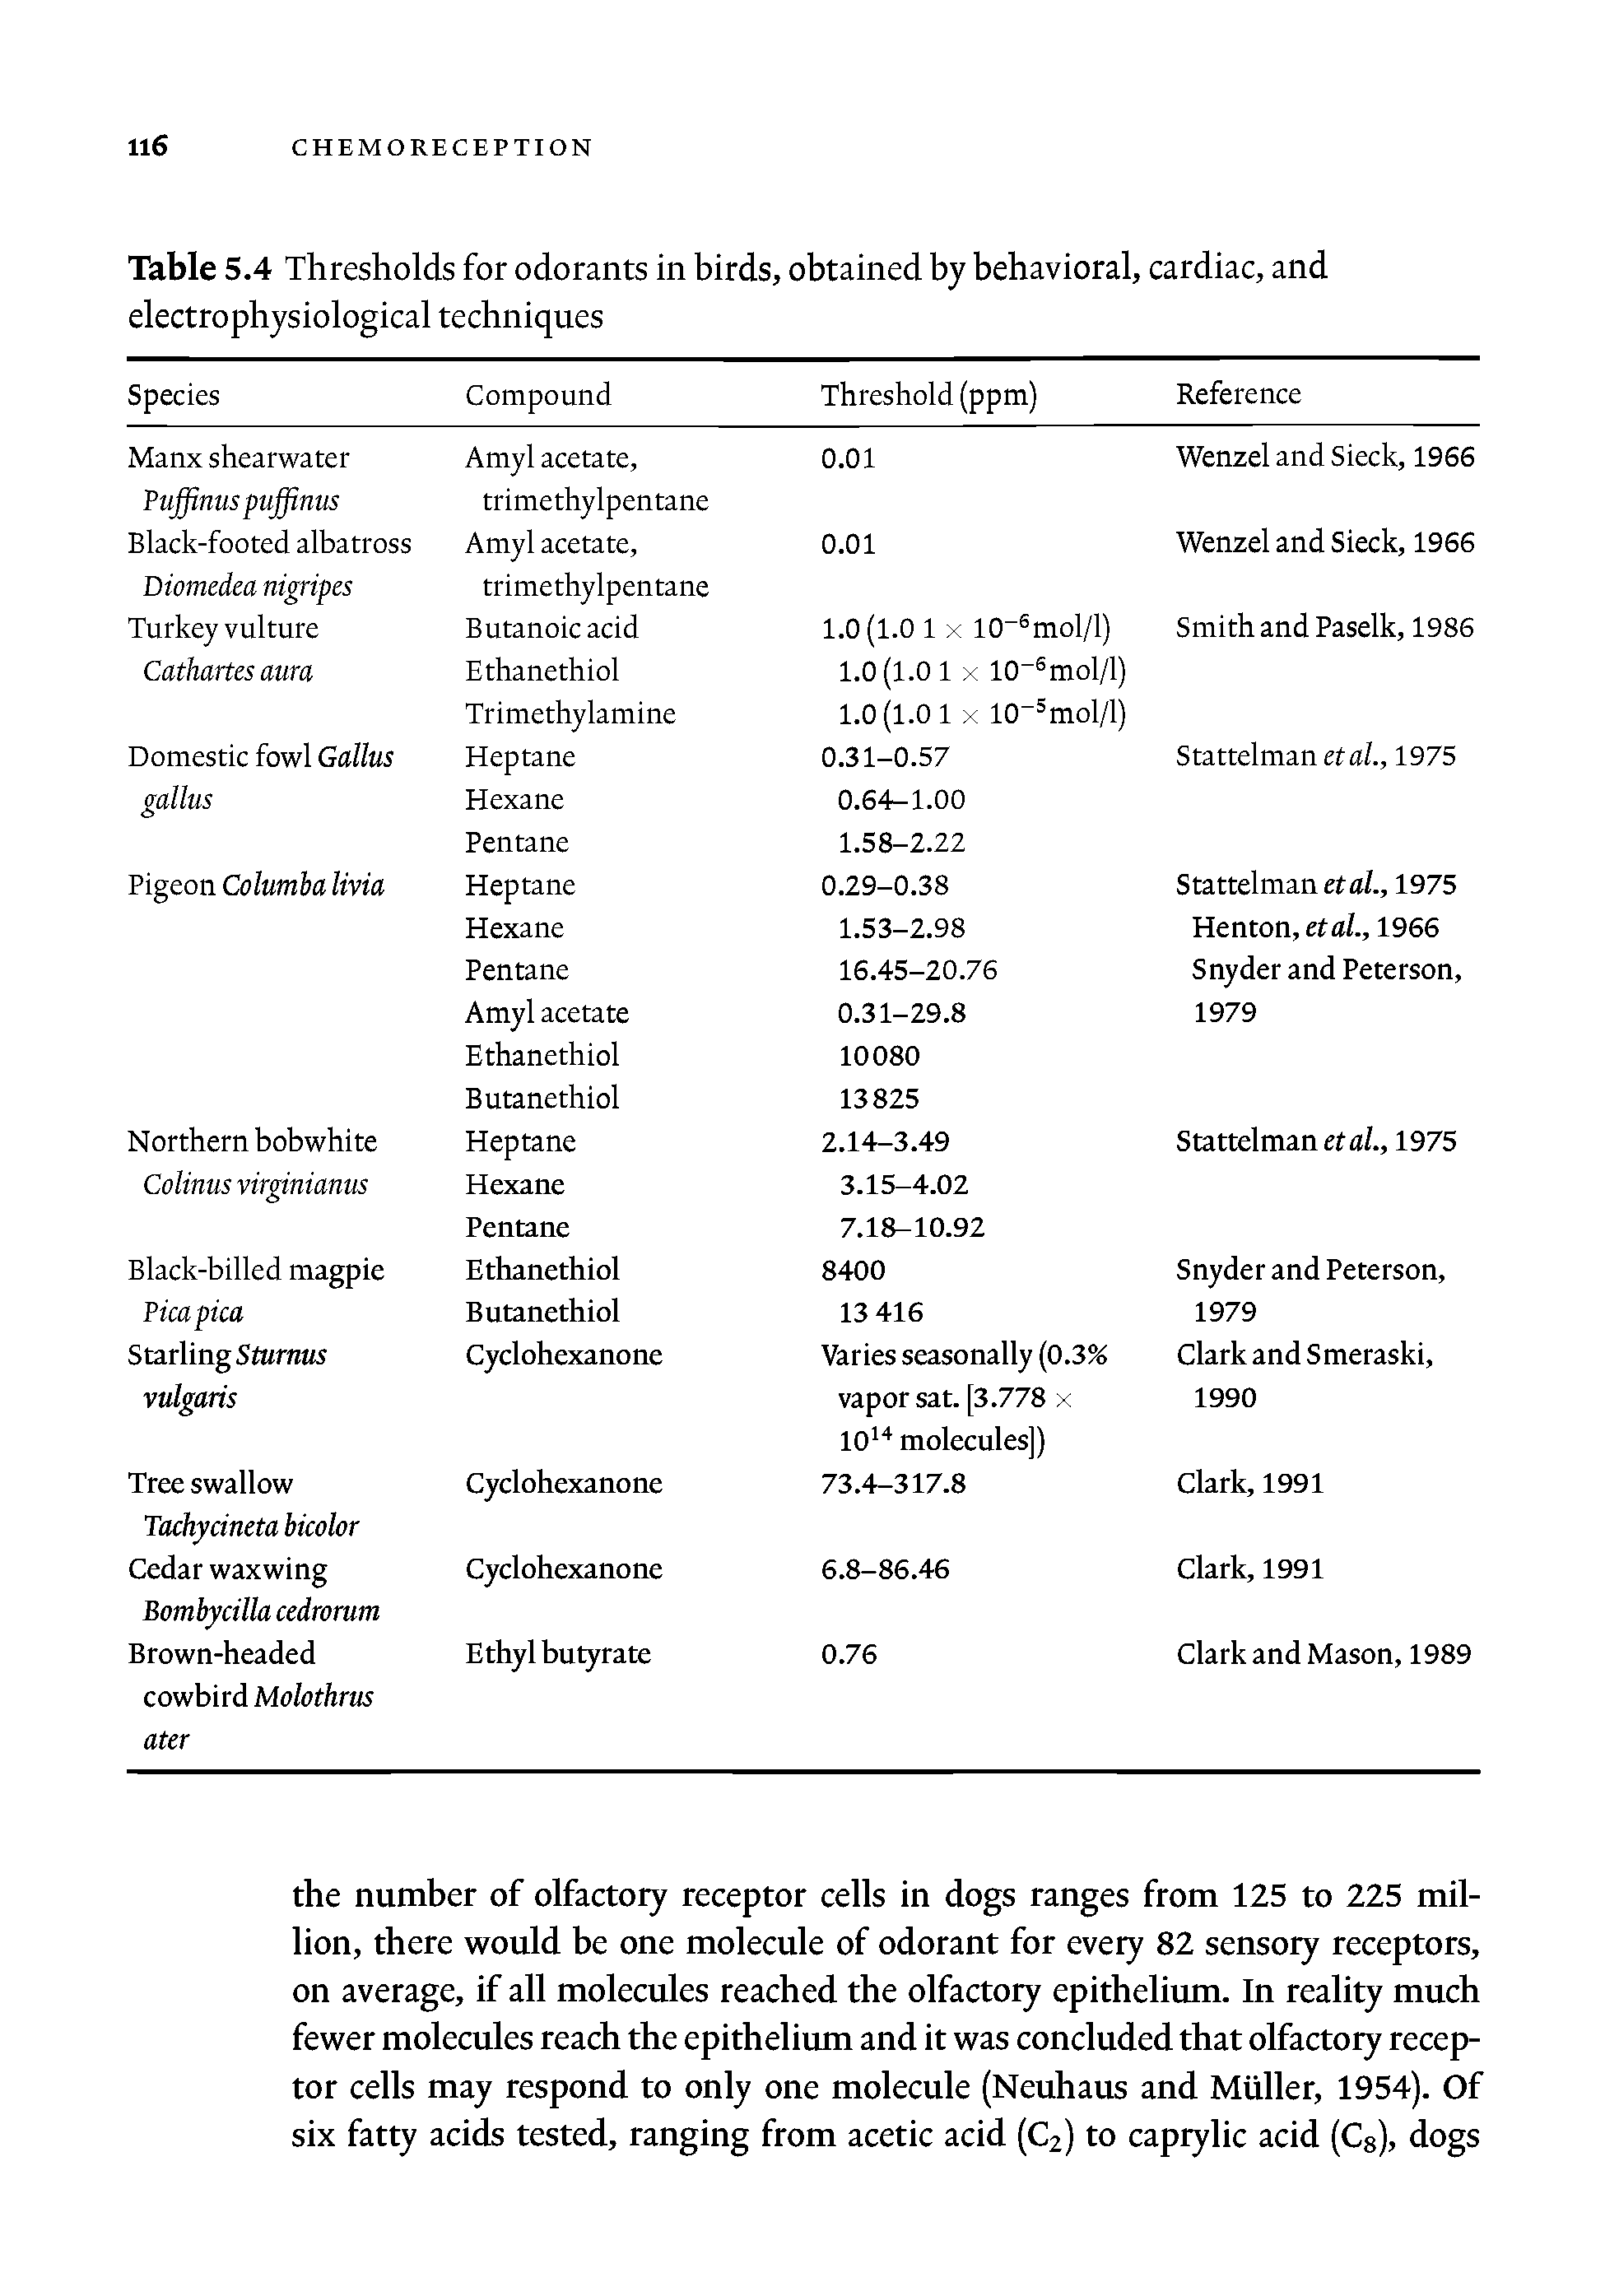 Table 5.4 Thresholds for odorants in birds, obtained by behavioral, cardiac, and electrophysiological techniques...